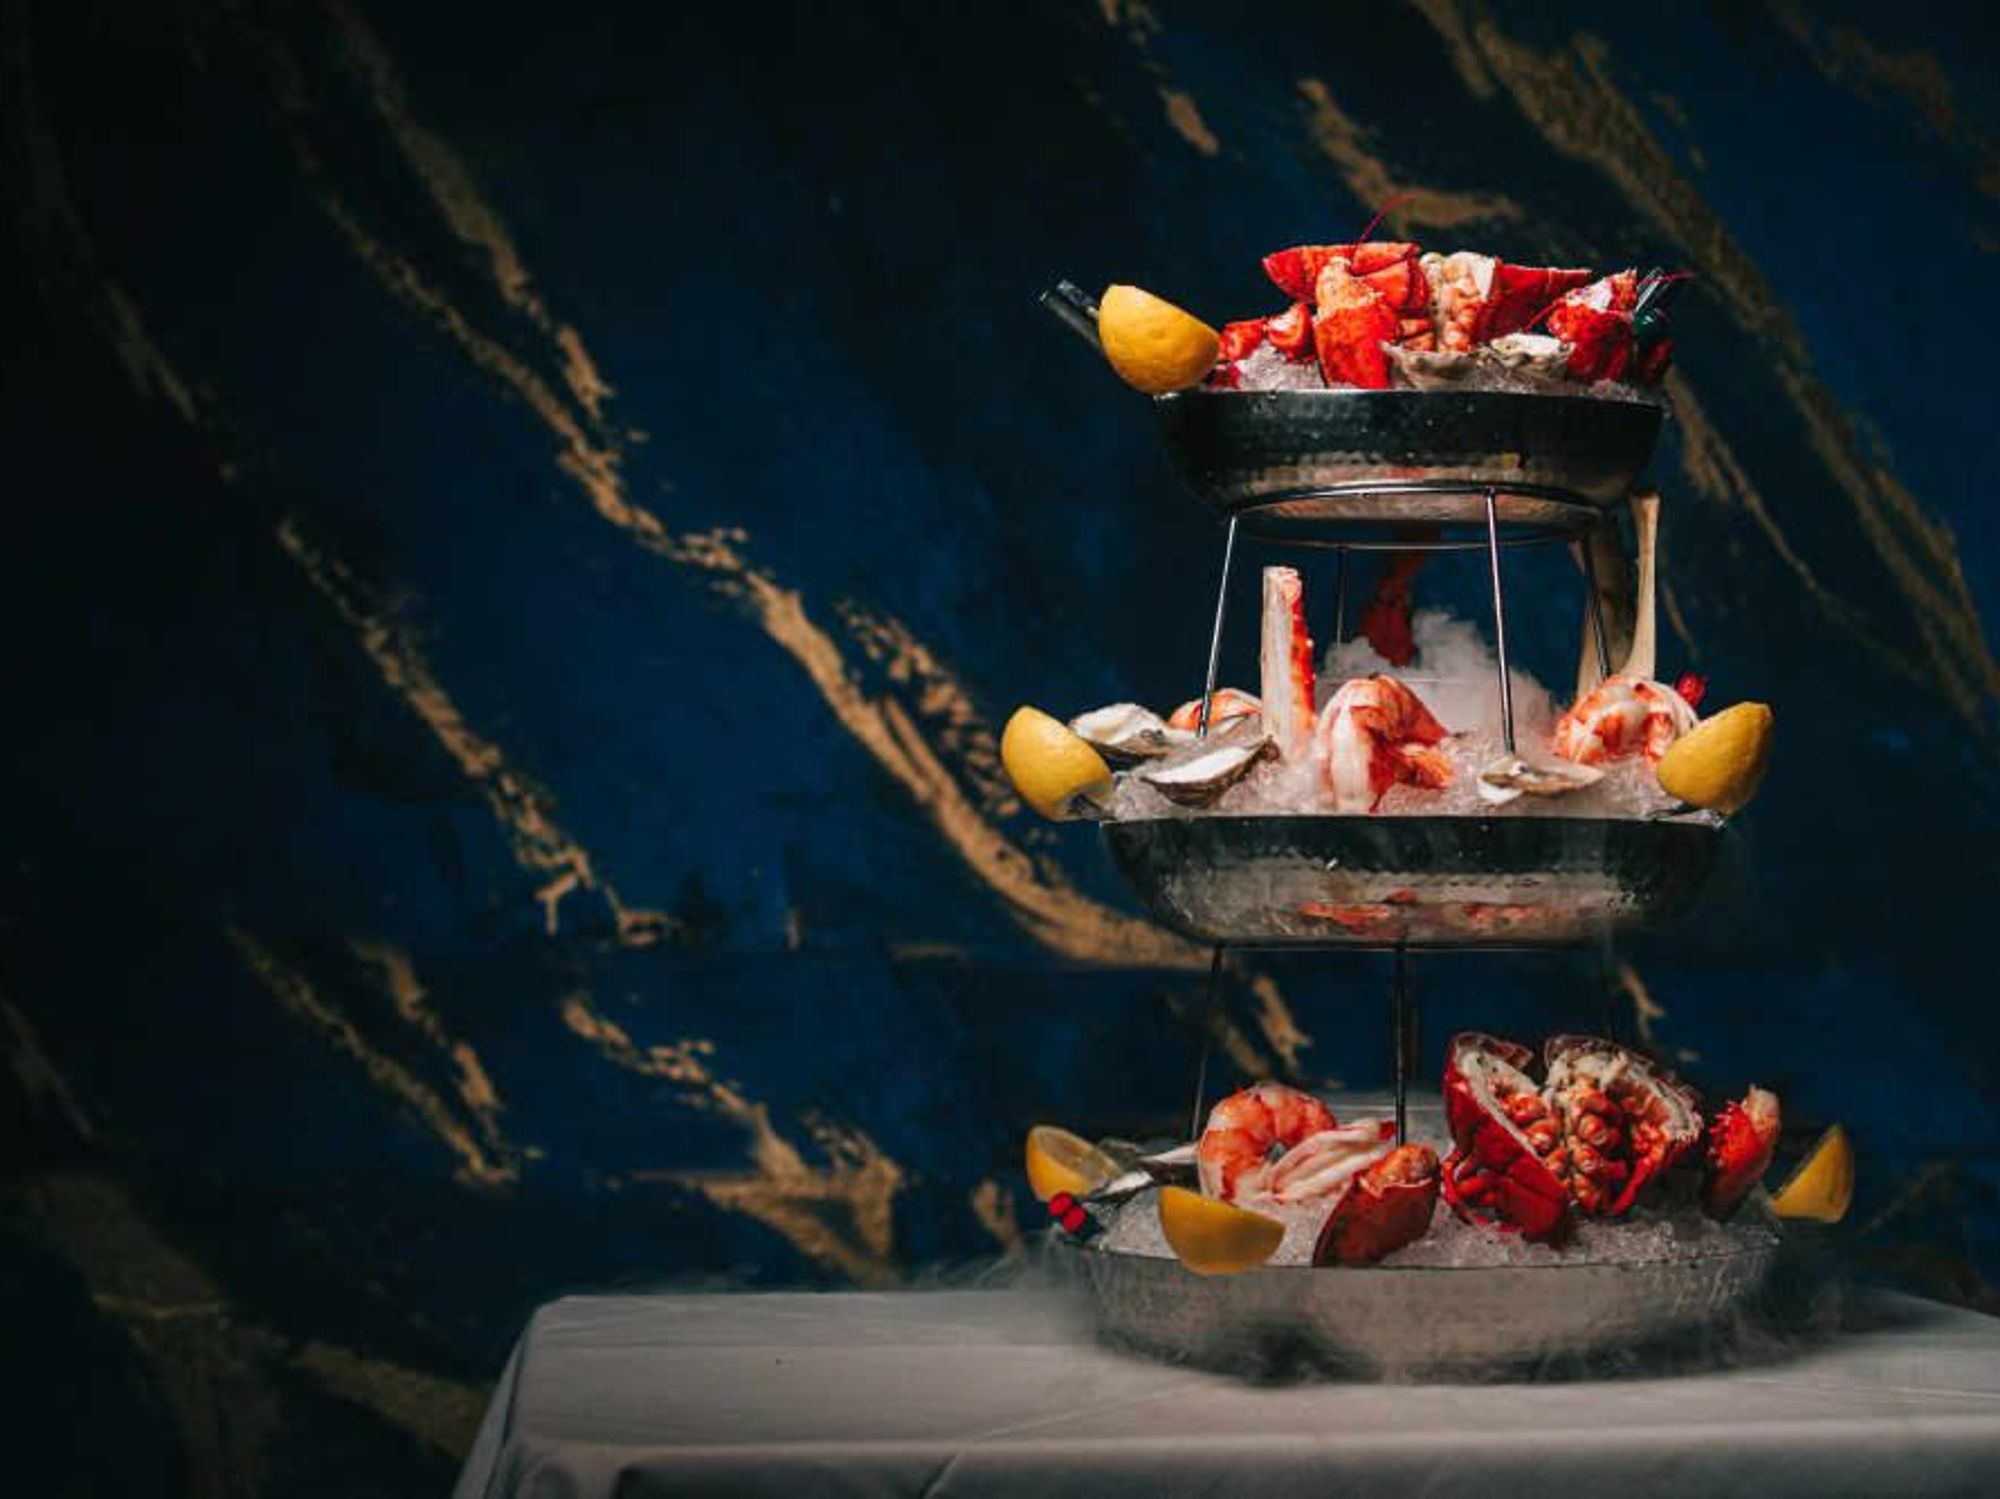 Gatsby's Prime Seafood tower